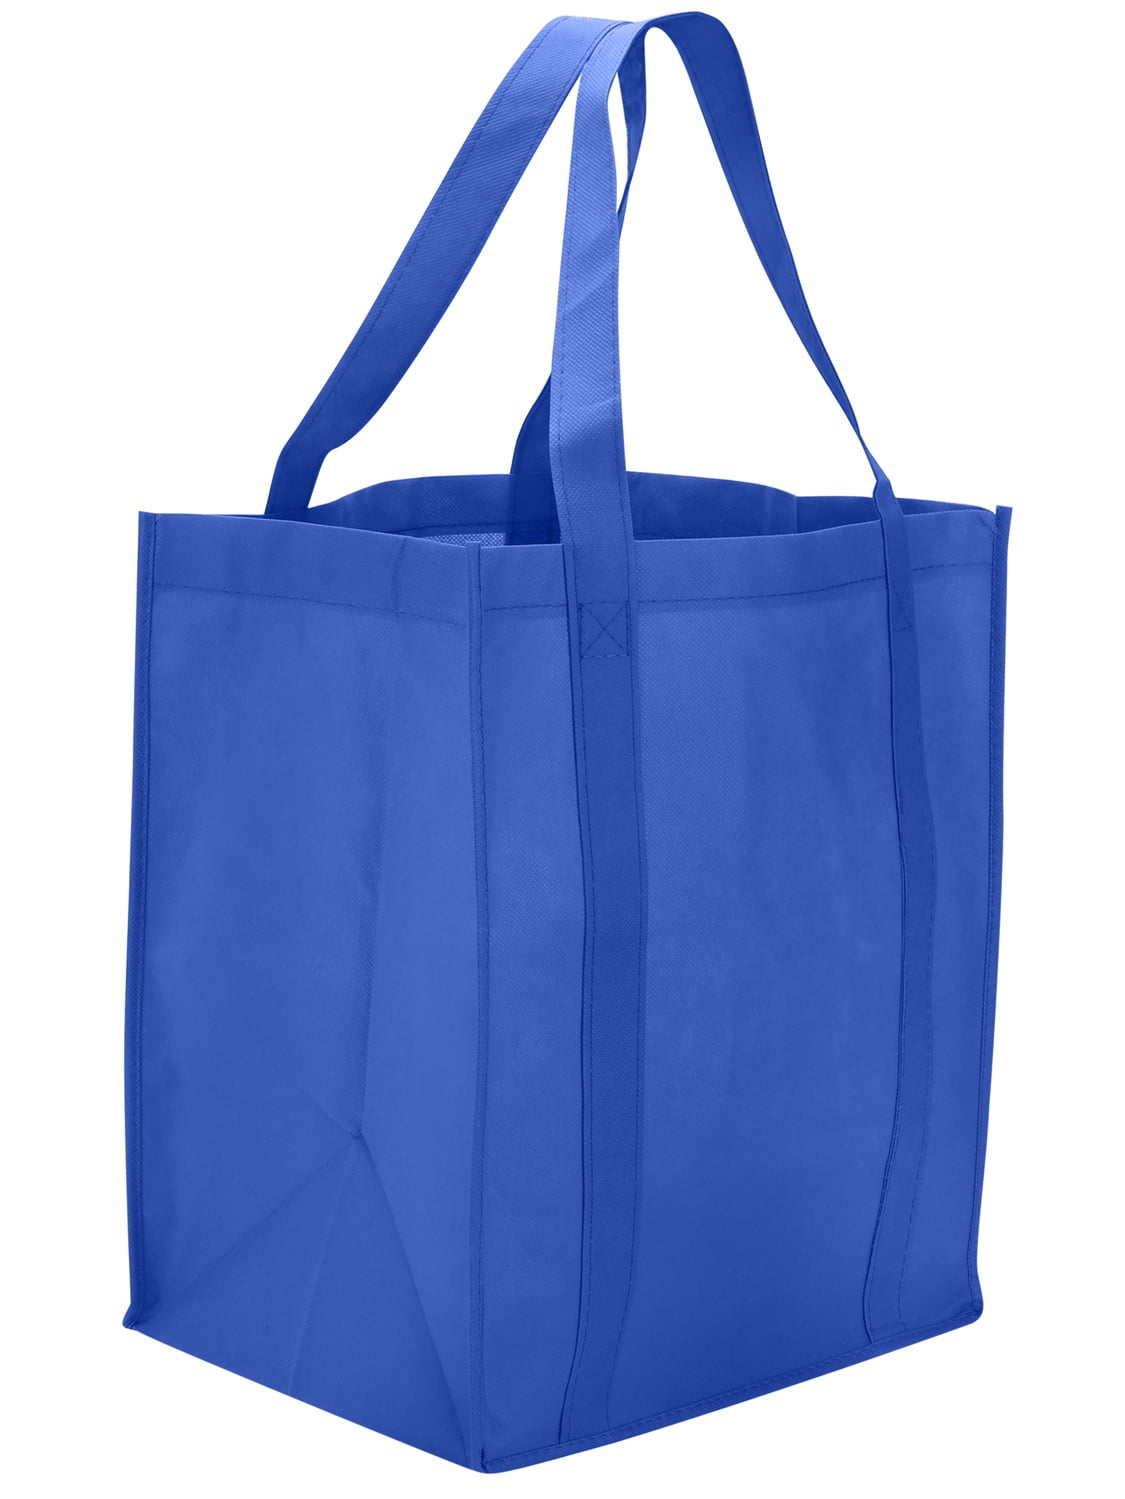 Reusable Grocery Bags100-POUNDER Extra Heavy Duty 3-PACK Grocery Bag Sack Foldable 100-lb Capacity 12.5 L X 9W X 15H Inches